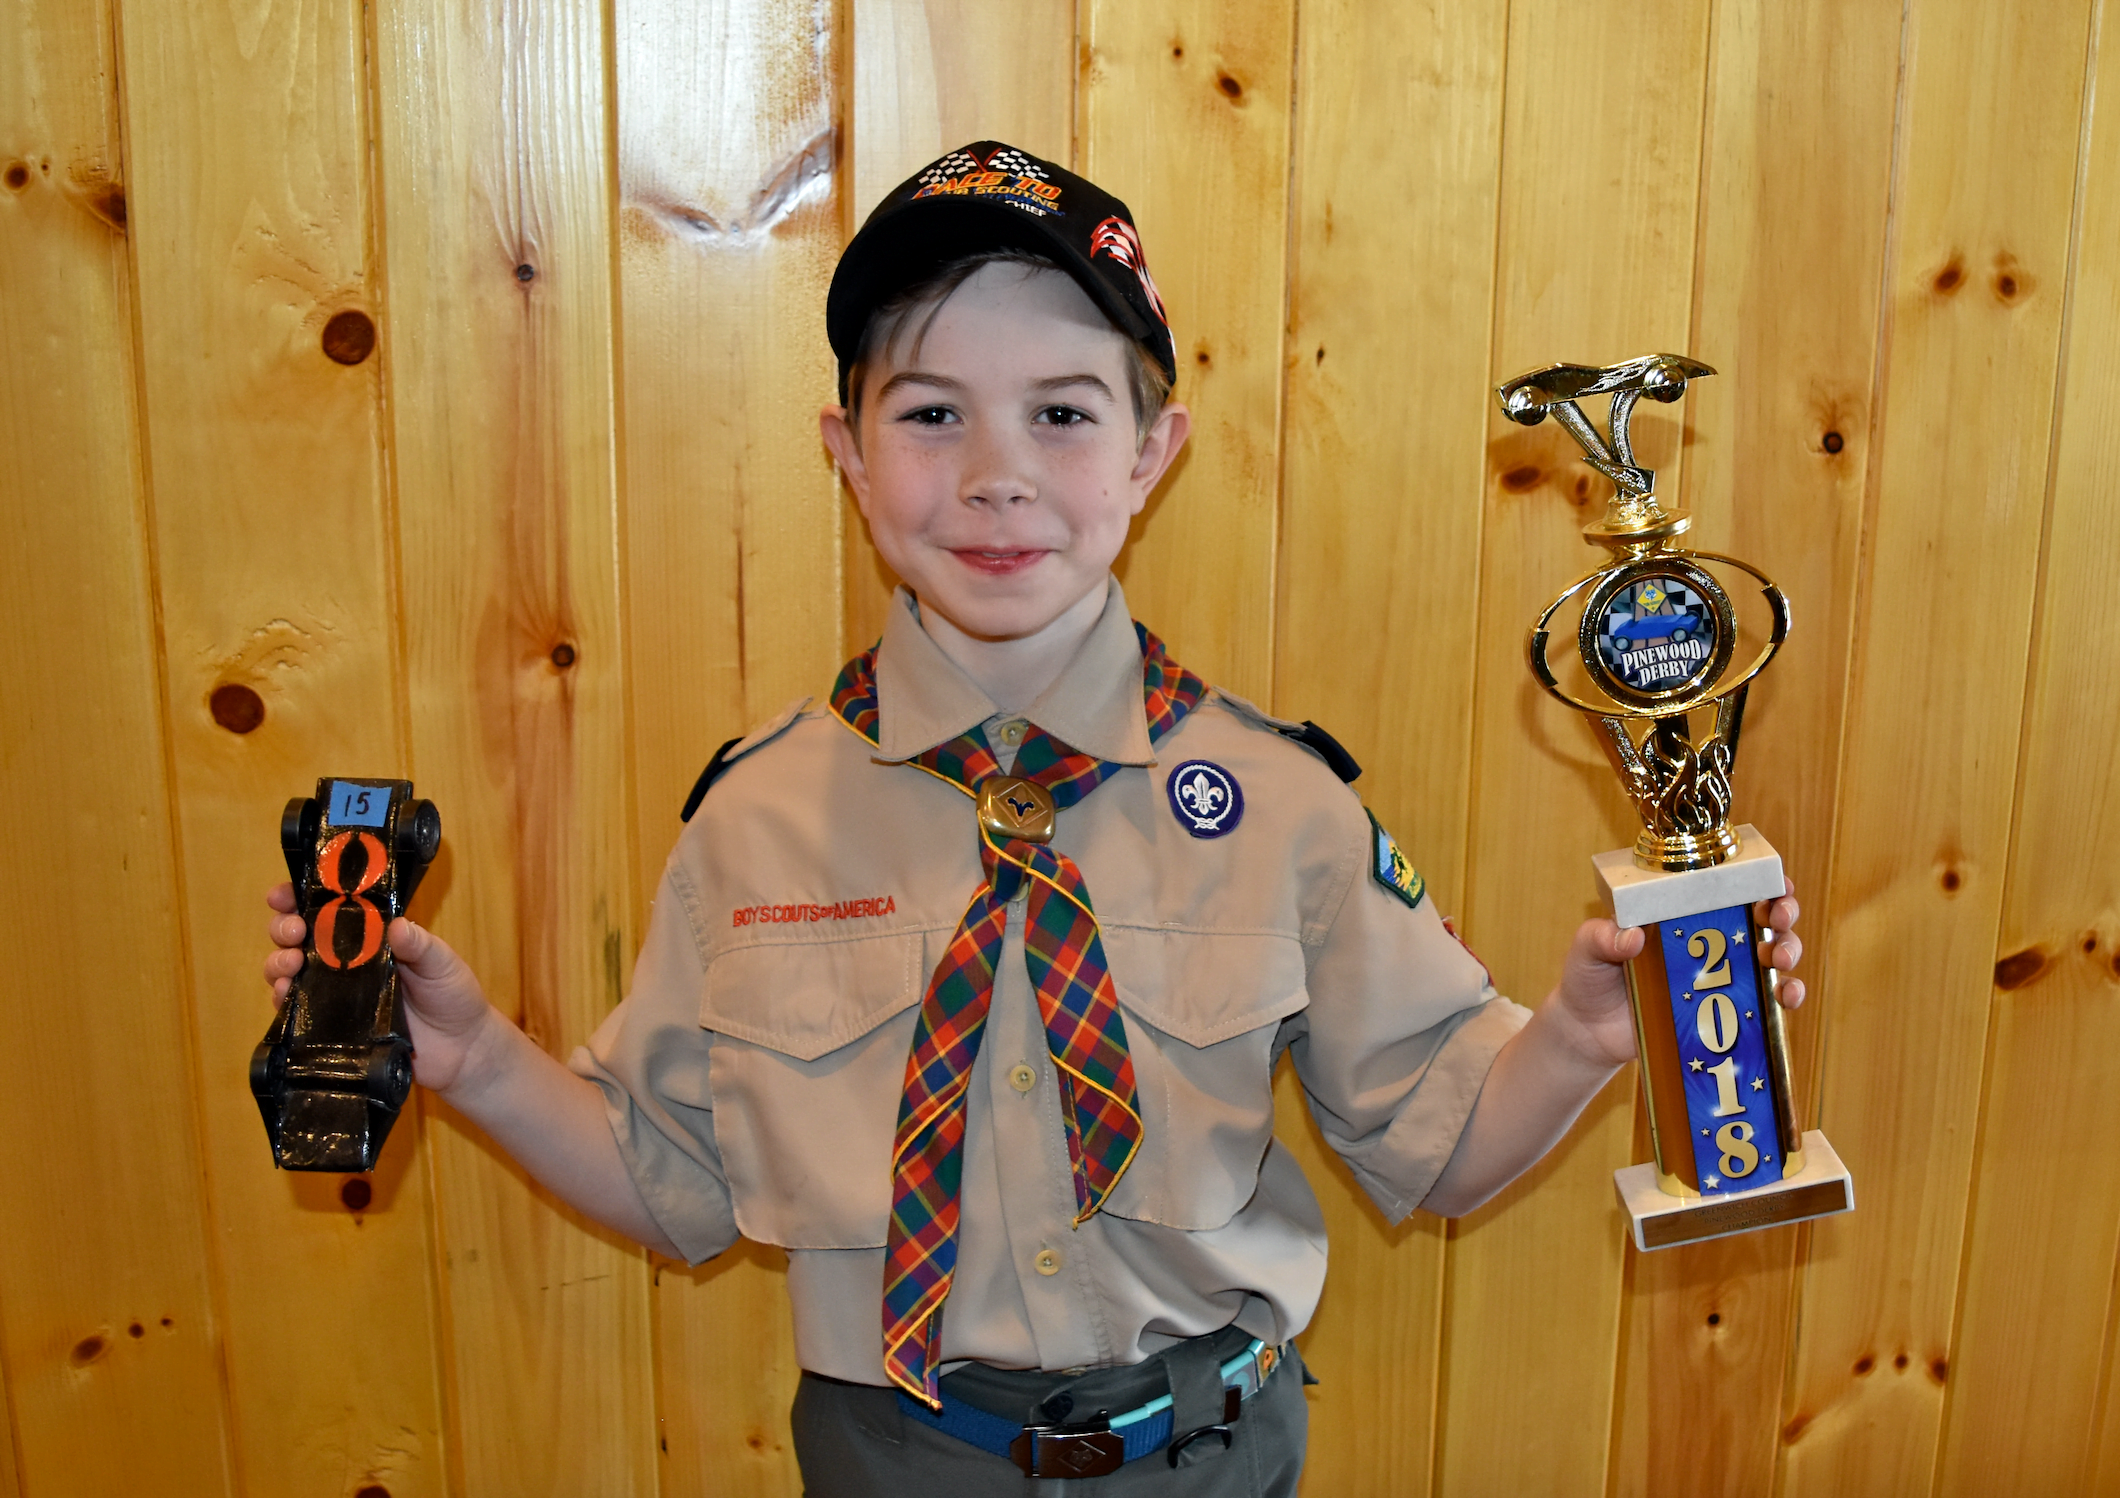 1st Place Winner, Austin Sciulla with his winning car and trophy at the Pinewood Derby Championship at Seton Scout Reservation in Greenwich. Photo Credit: Ray Garrison